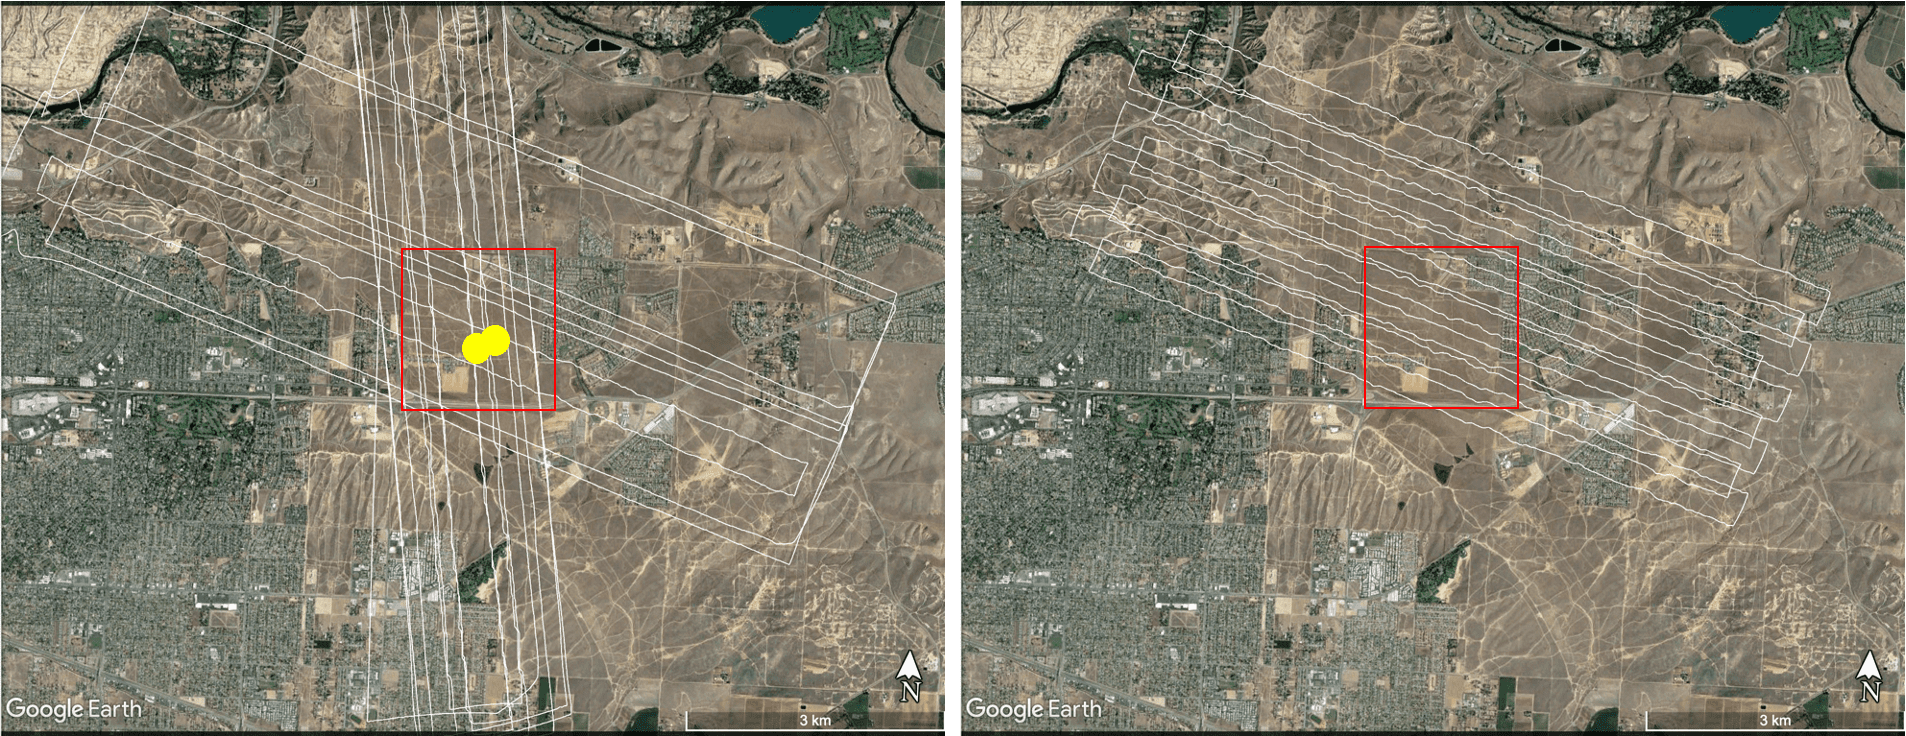 Satellite image of 2 areas: White outlines indicate the areas imaged by AVIRIS-NG on May 20 (left) and May 23 (right), 2022